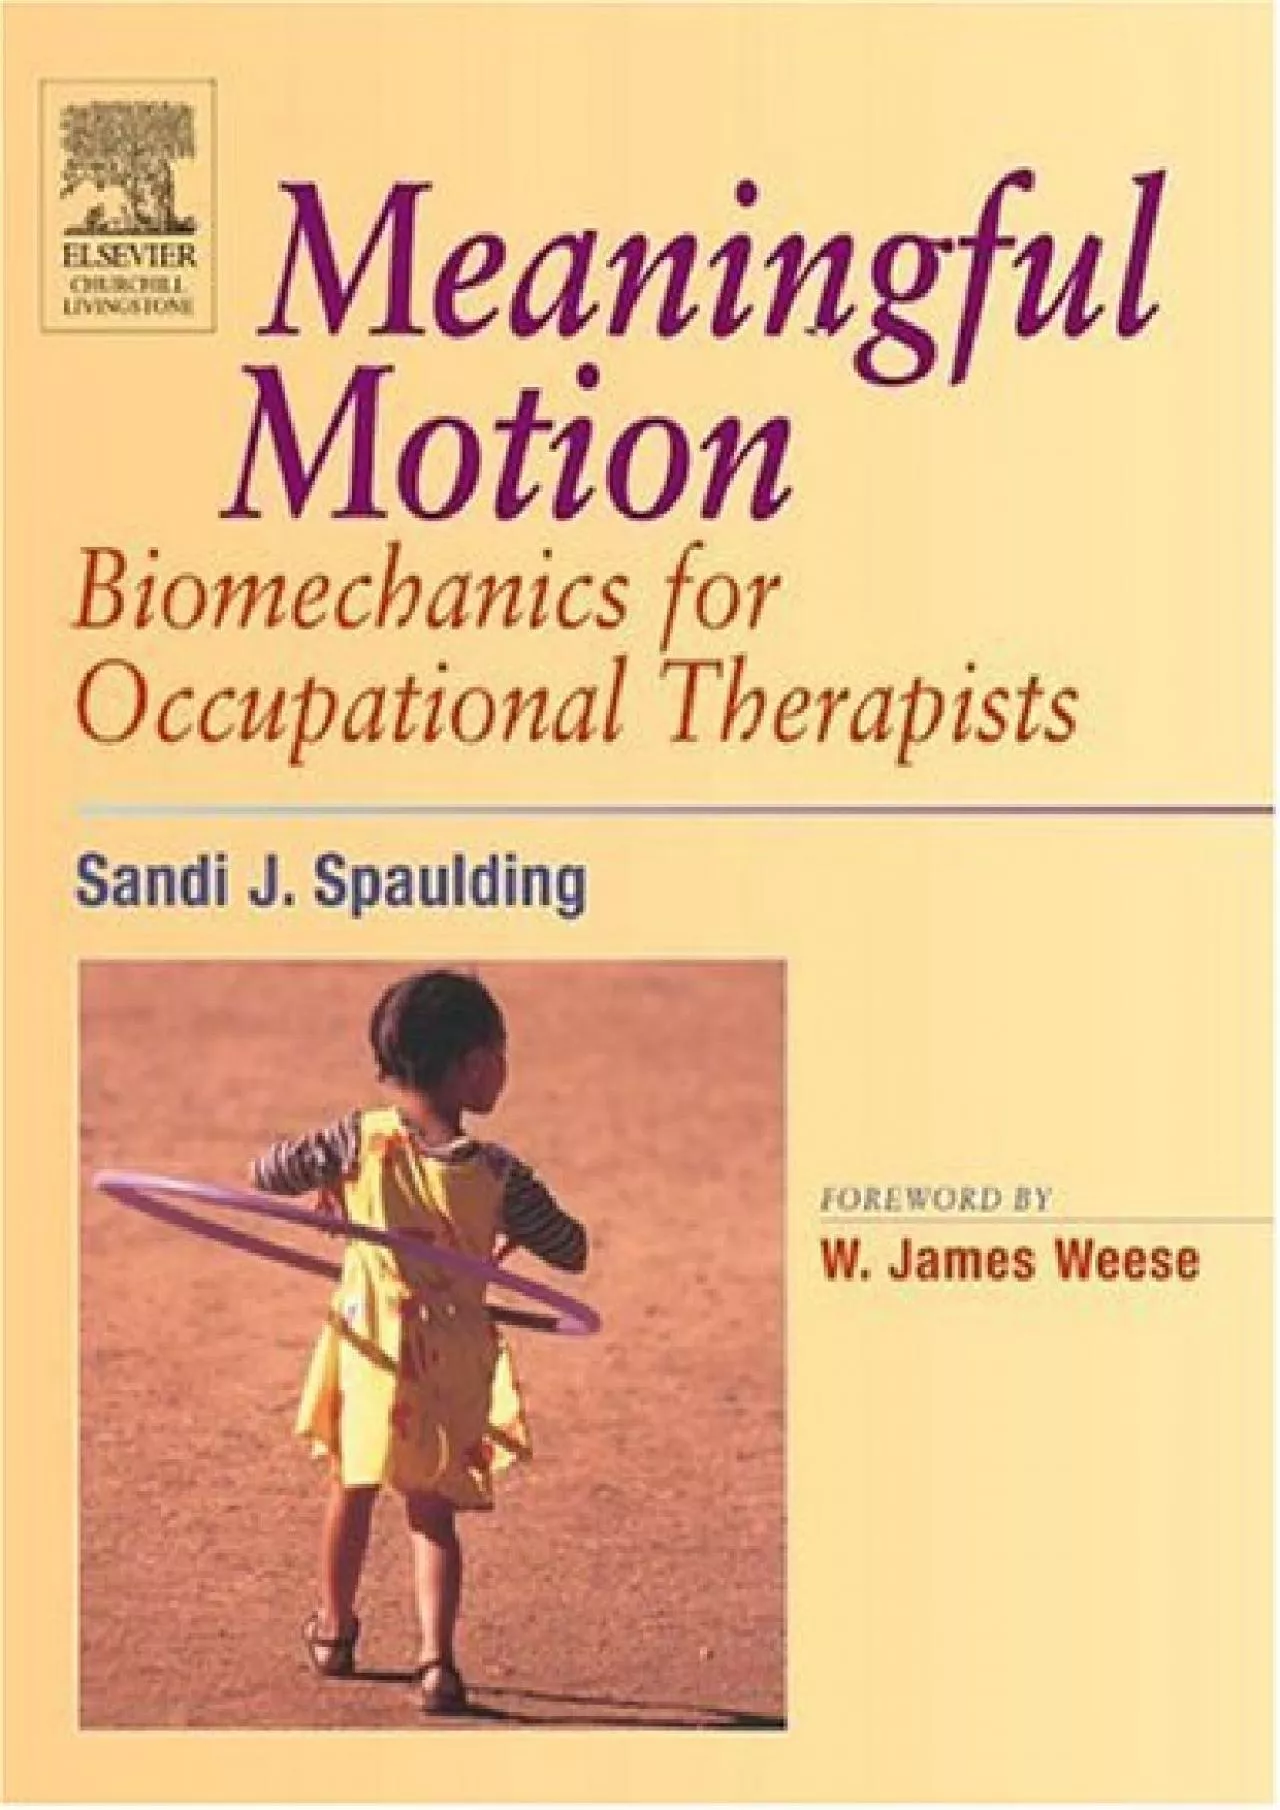 (BOOK)-Meaningful Motion: Biomechanics for Occupational Therapists